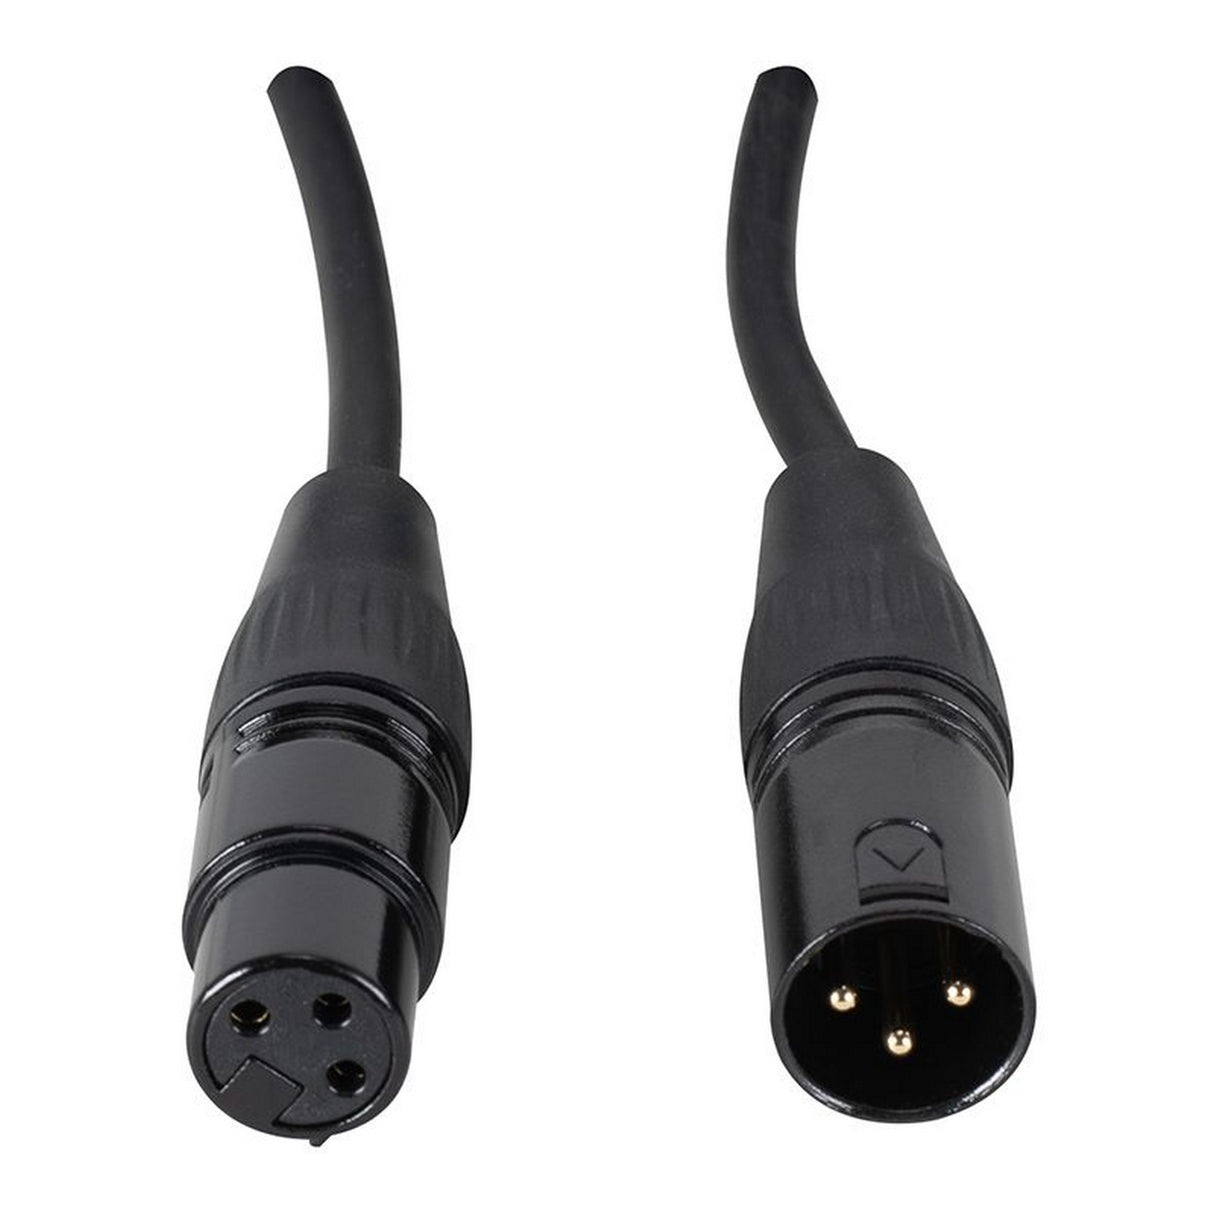 Accu Cable XL3A 3-Foot 3-Pin XLR Male to XLR Female Cable